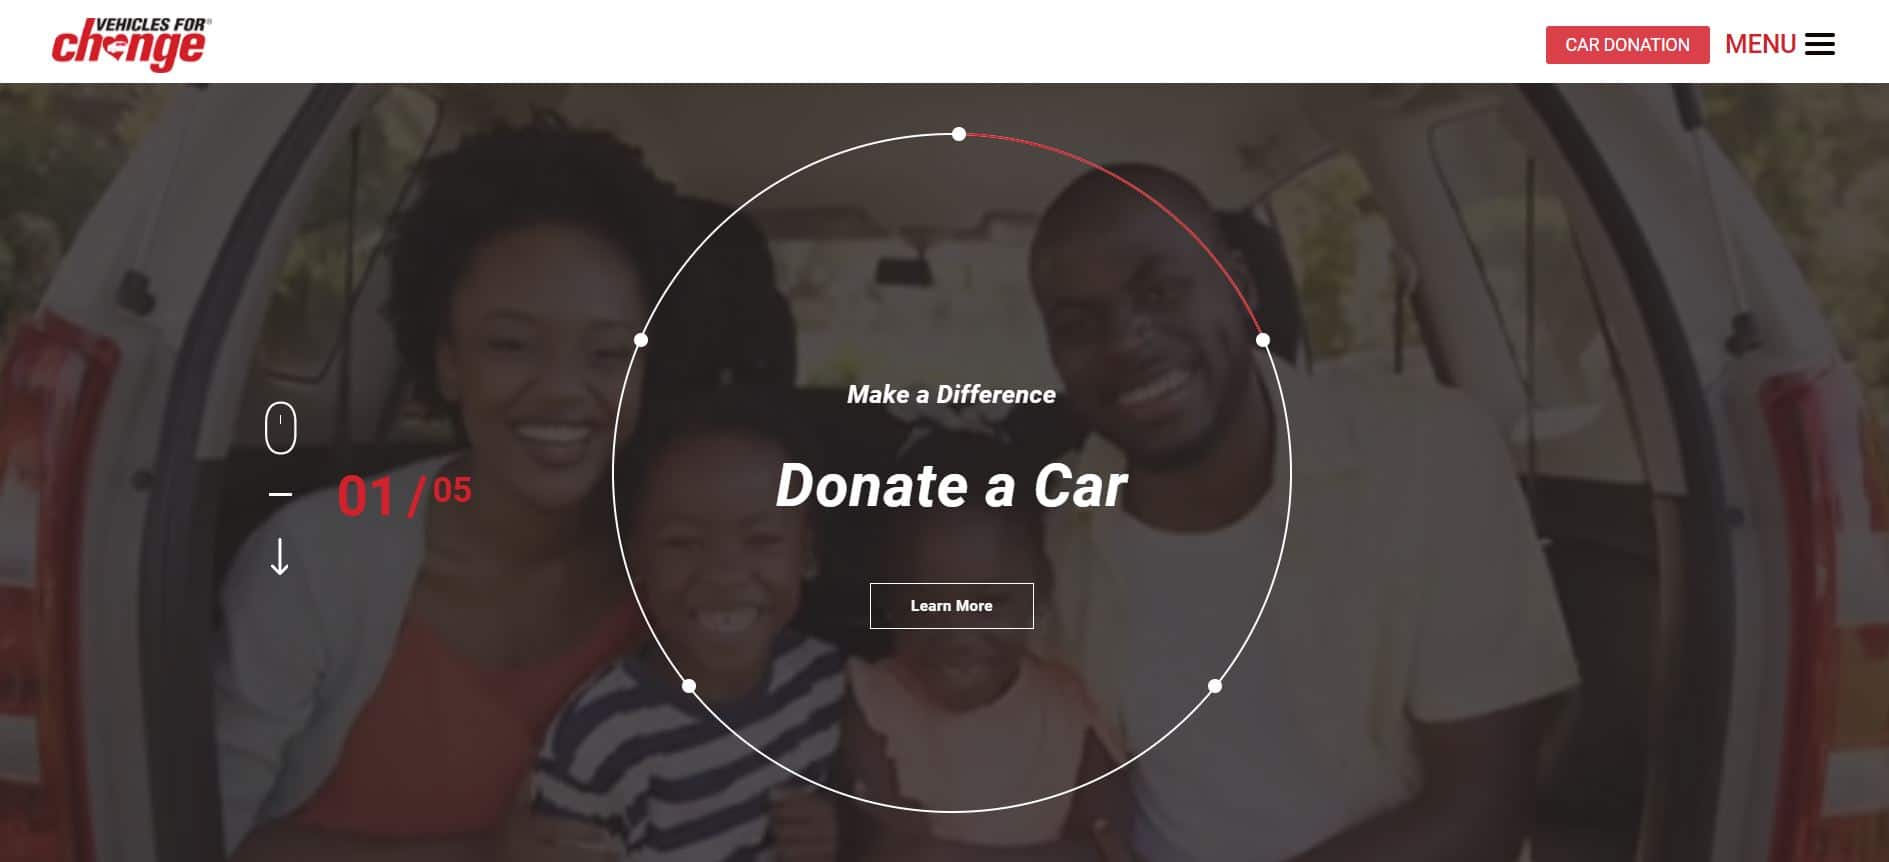 screenshot of the vehicles for change homepage